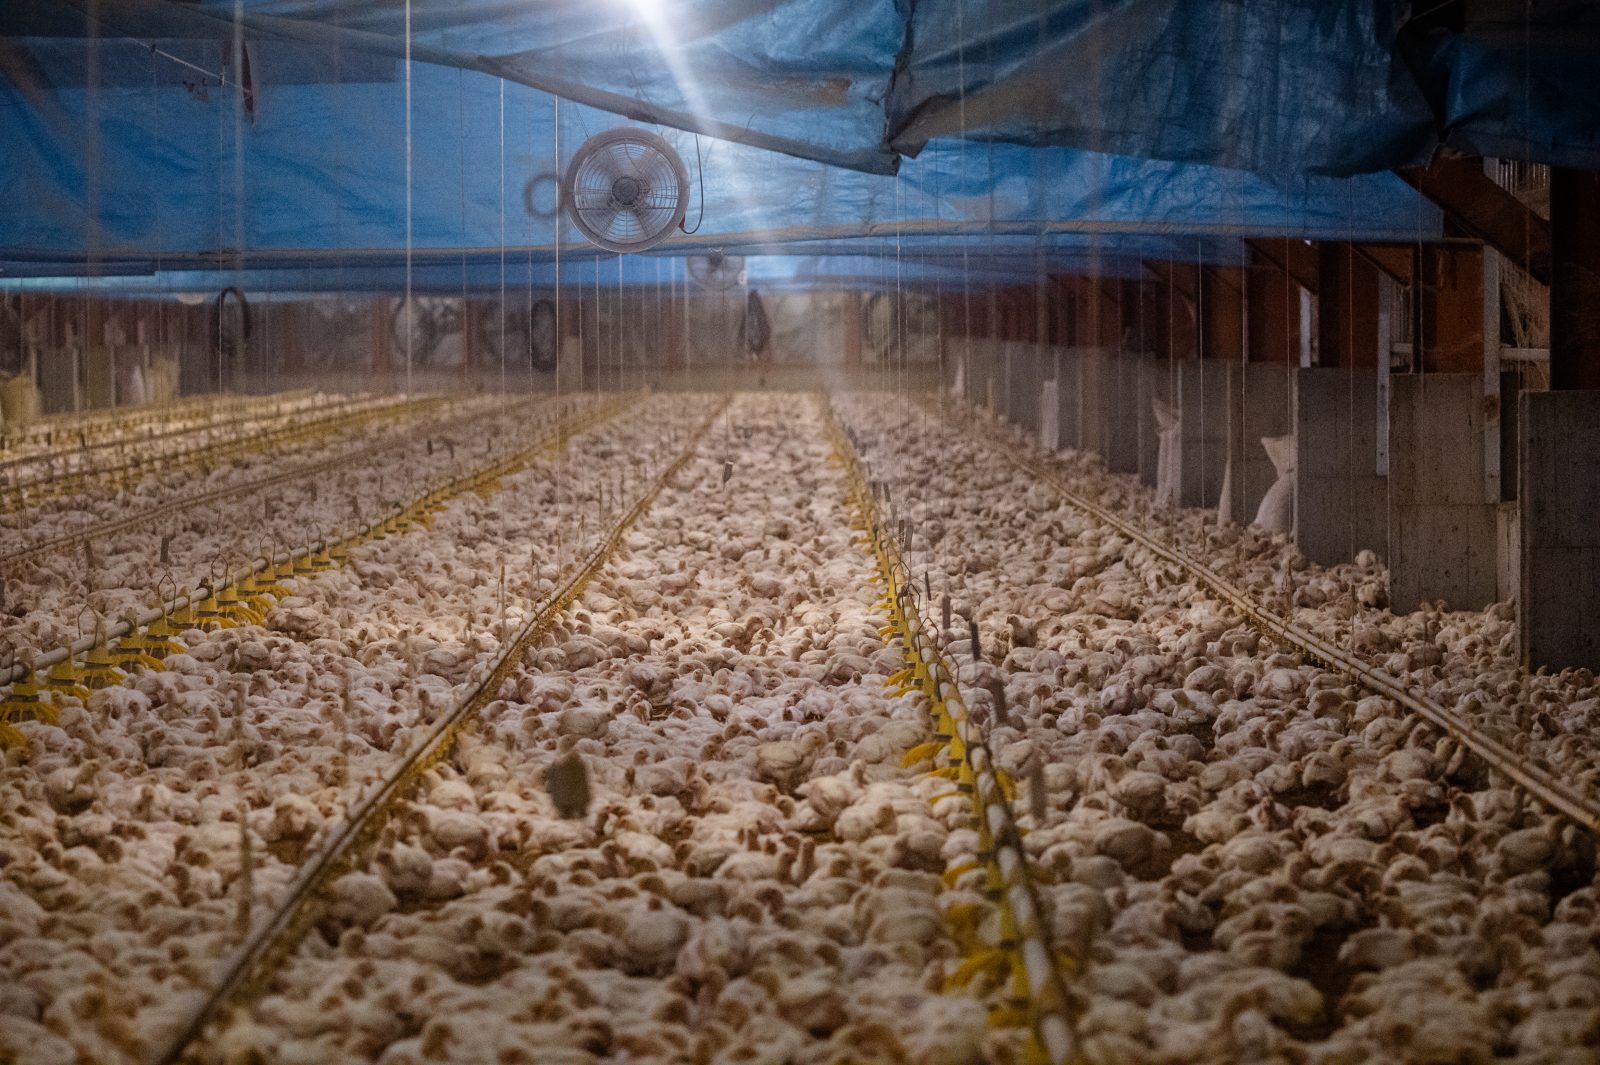 Tens of thousands of young chickens in a multi-level industrial farm.